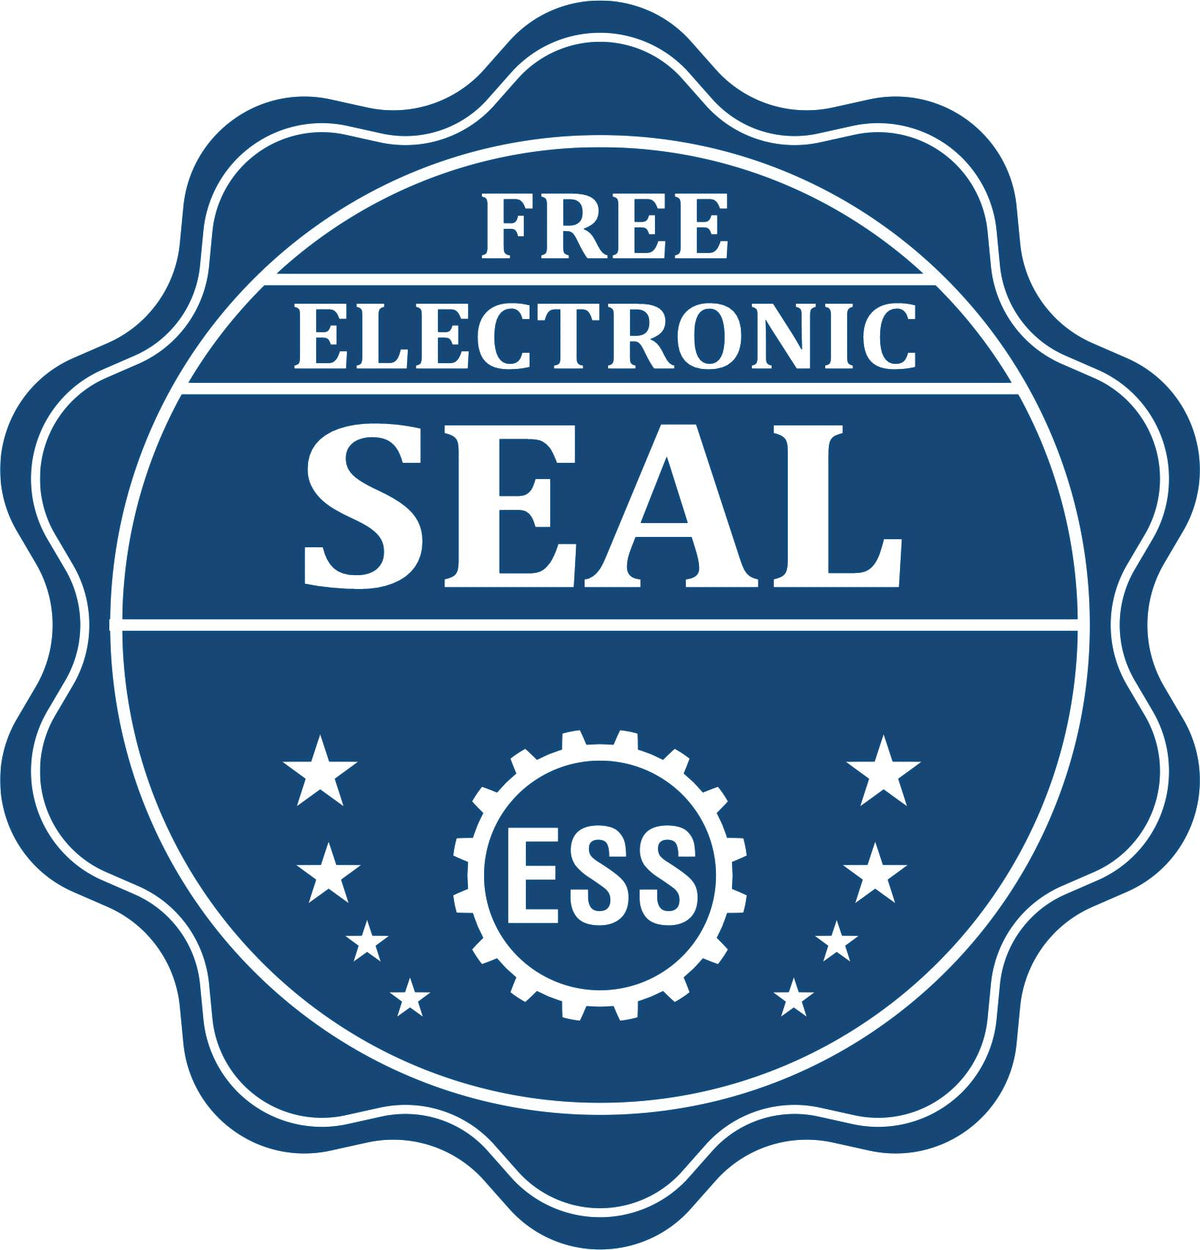 A badge showing a free electronic seal for the Gift Maine Engineer Seal with stars and the ESS gear on the emblem.